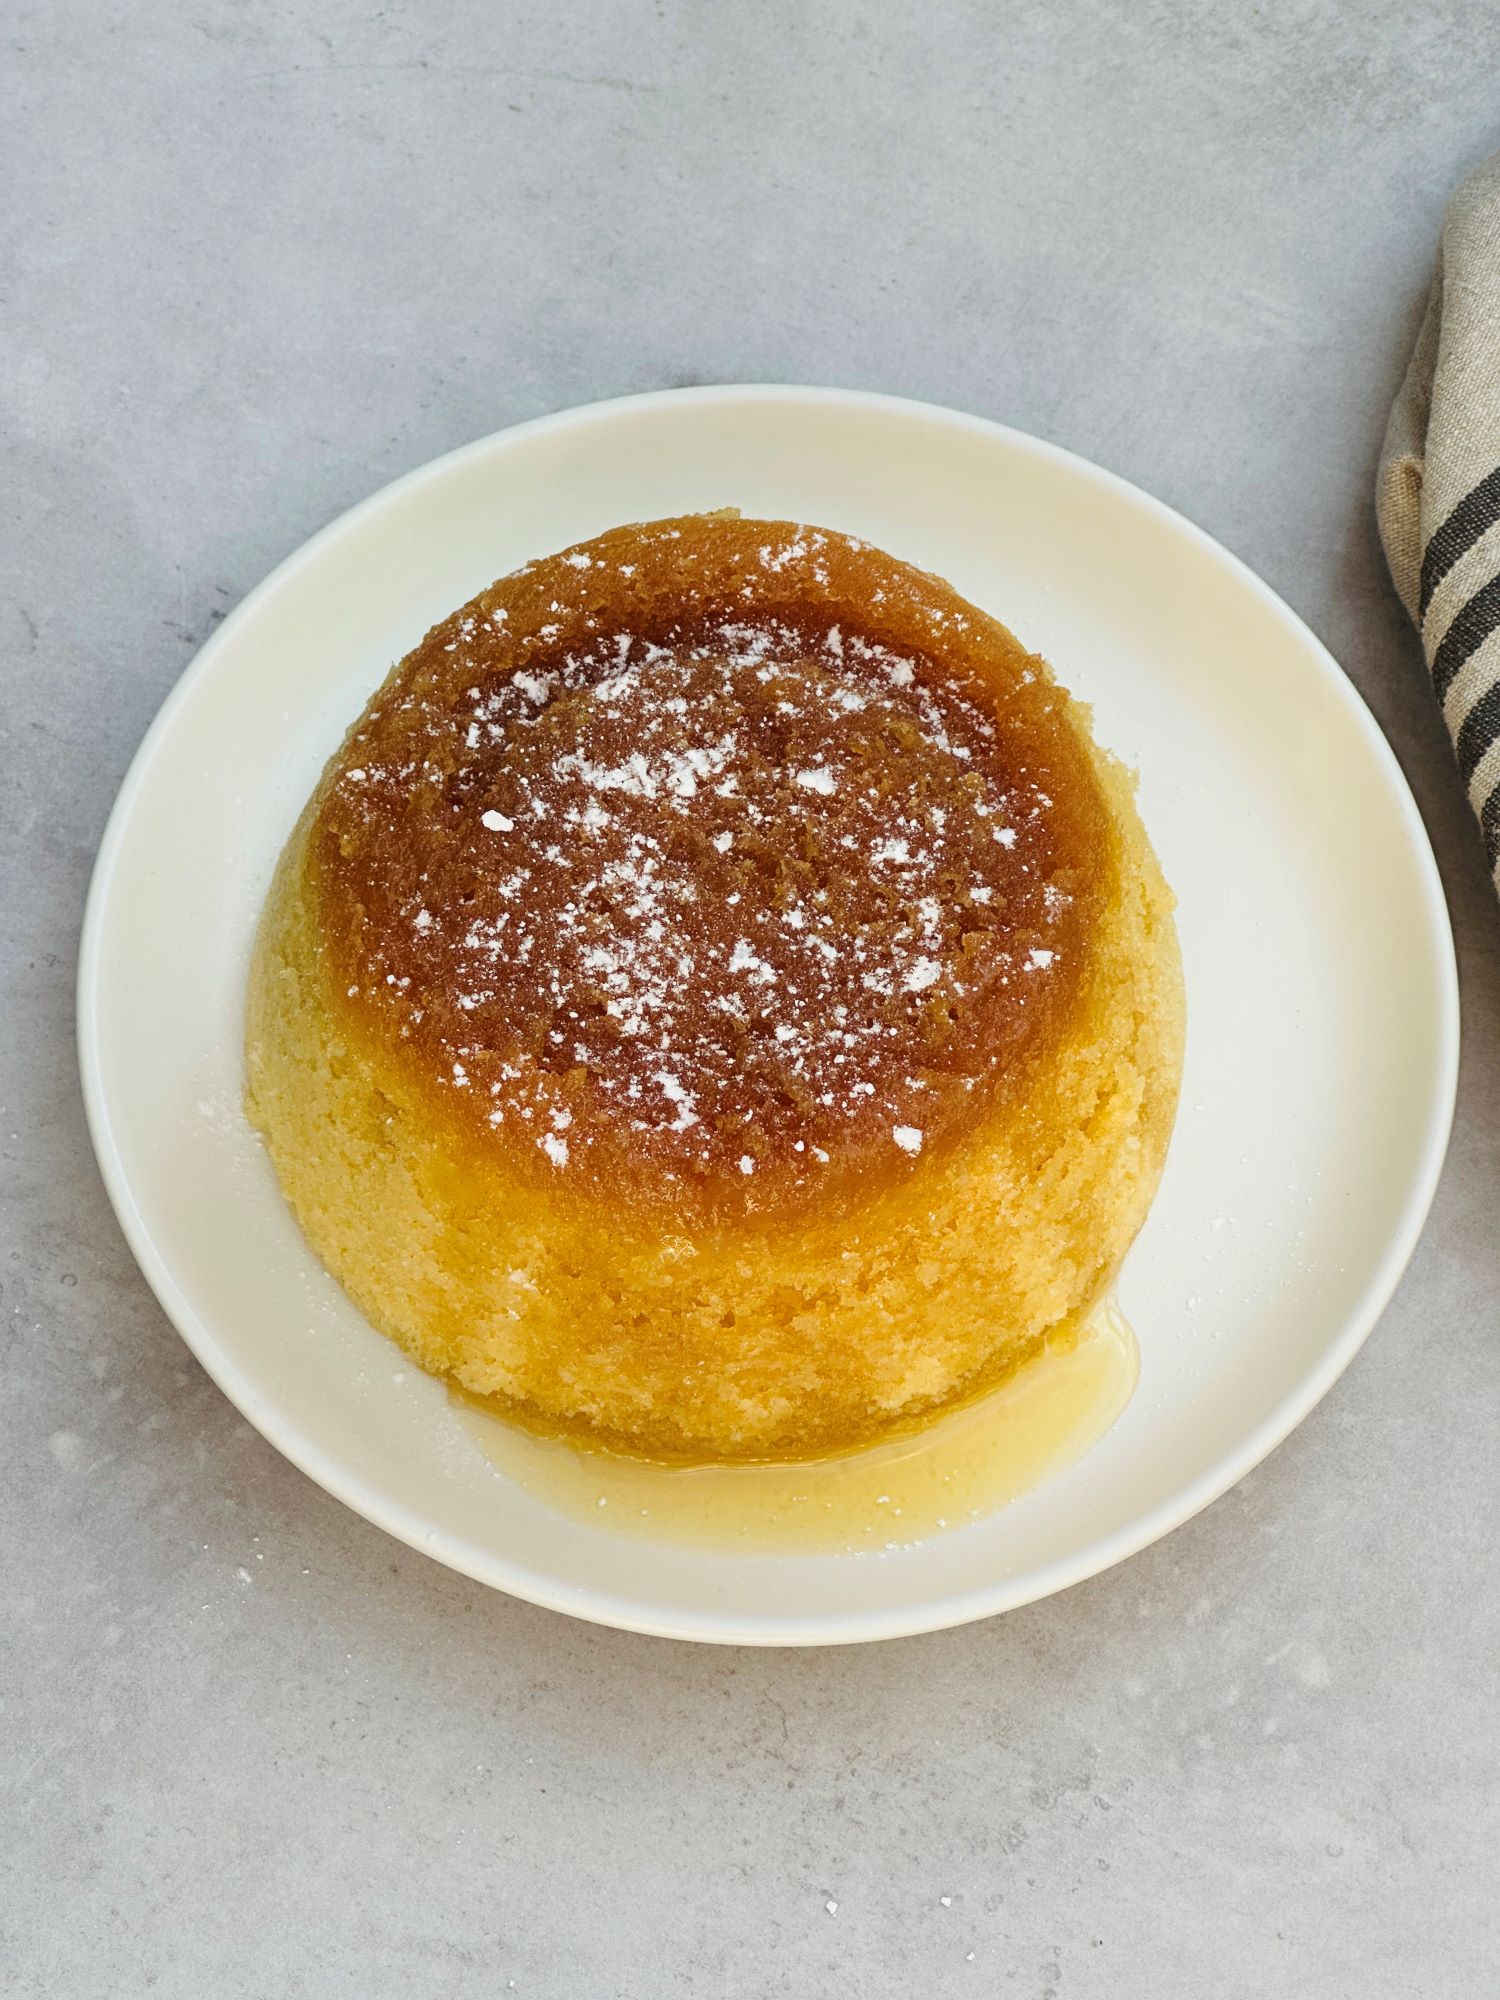 microwave treacle sponge pudding with icing sugar sprinkled on top on a white plate with a tea towel next to it.